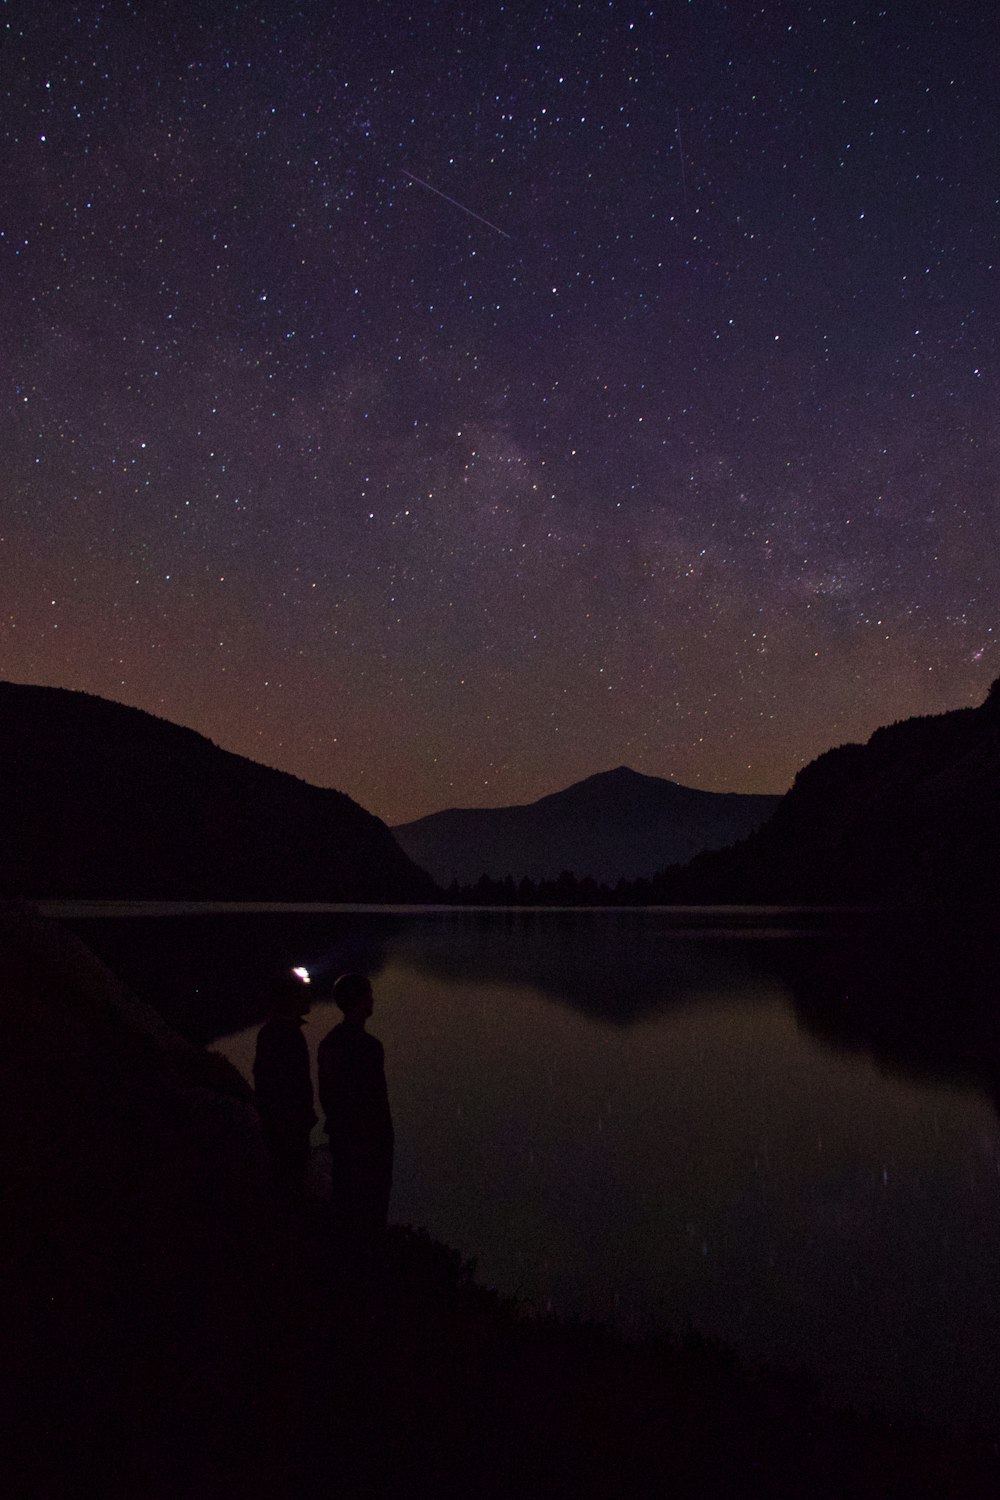 silhouette of 2 person standing near body of water during night time